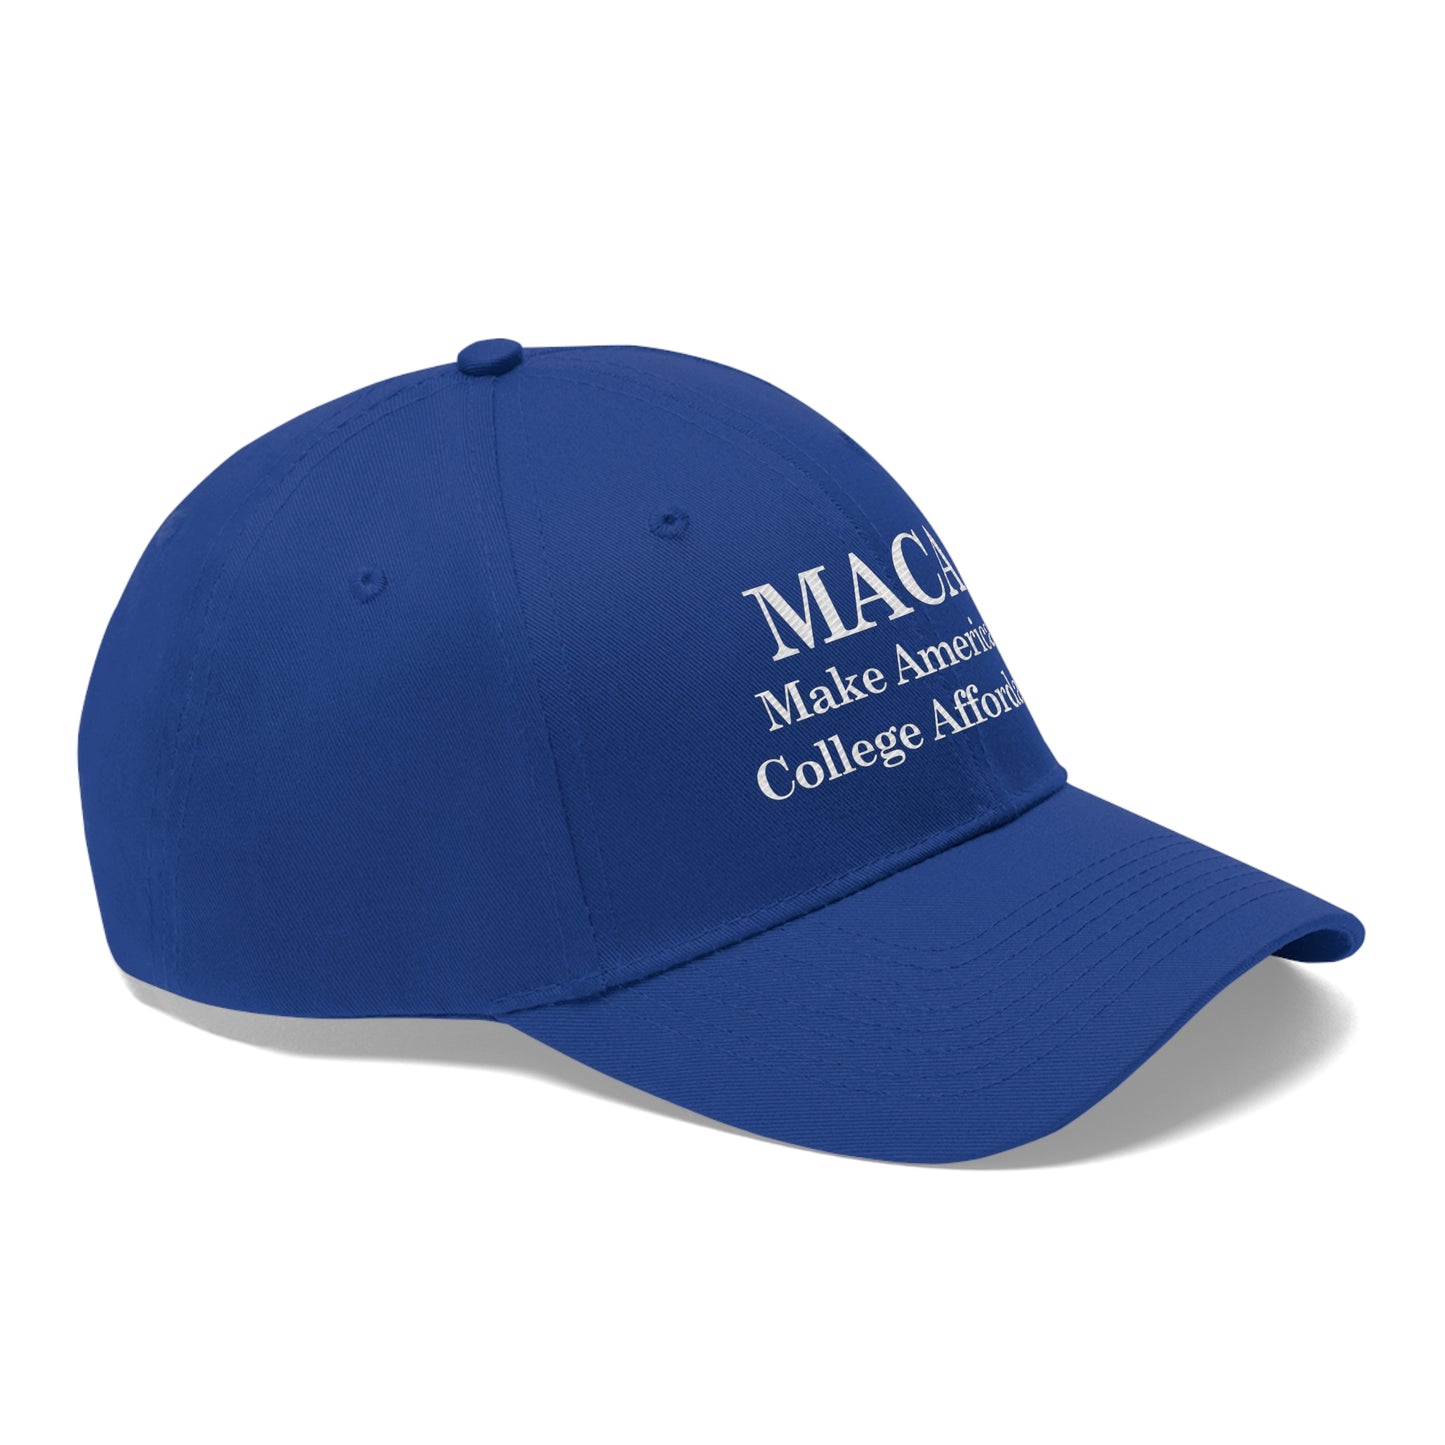 MACA: Make American College Affordable Blue or Red Unisex Twill Hat